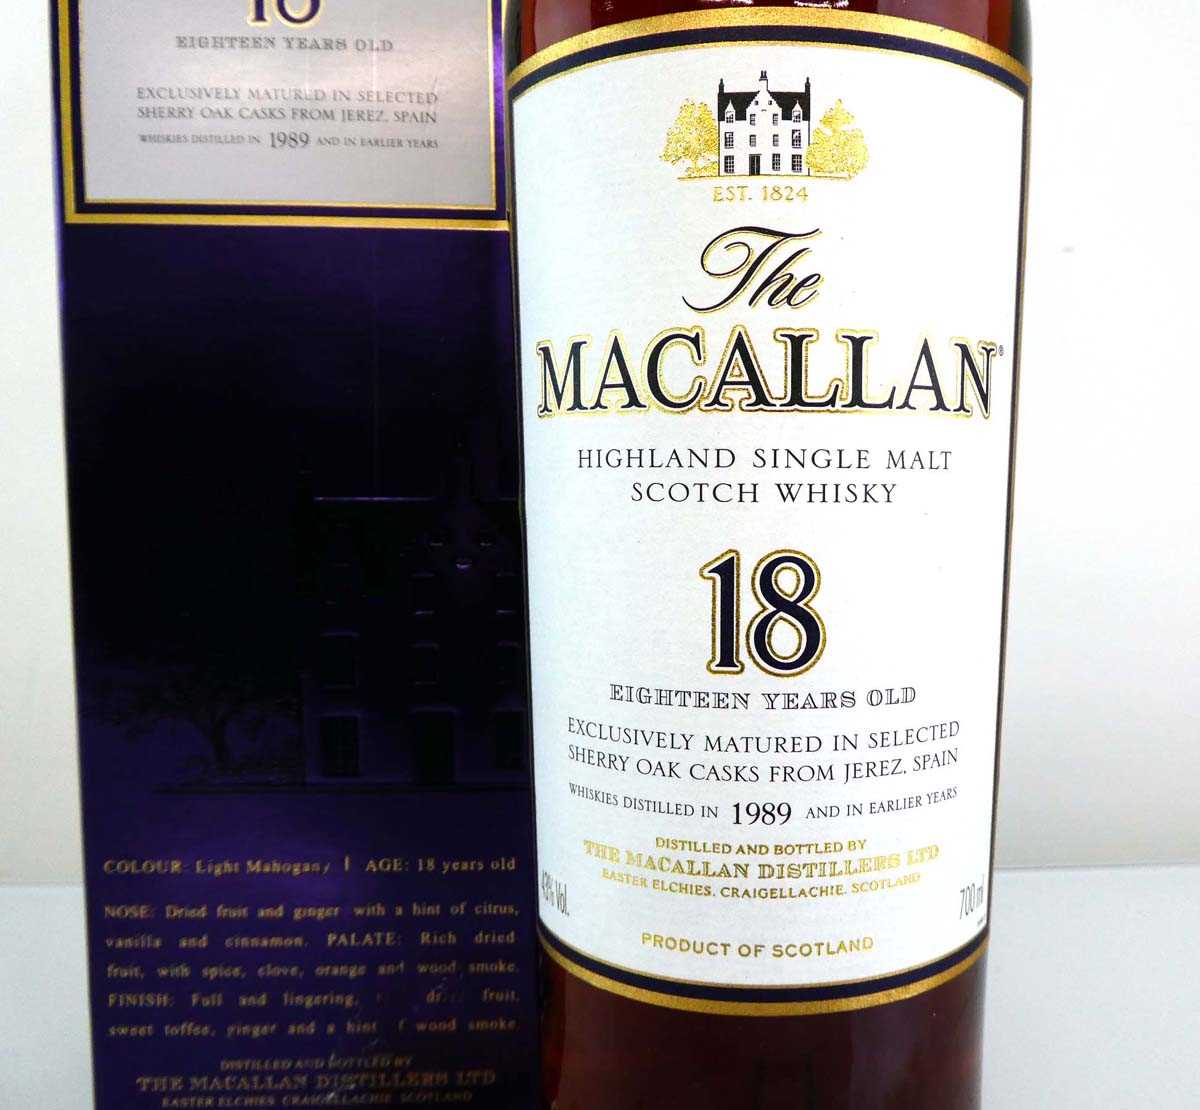 A bottle of The MACALLAN 18 years old Highland Single Malt Scotch Whisky with box matured in - Image 2 of 3